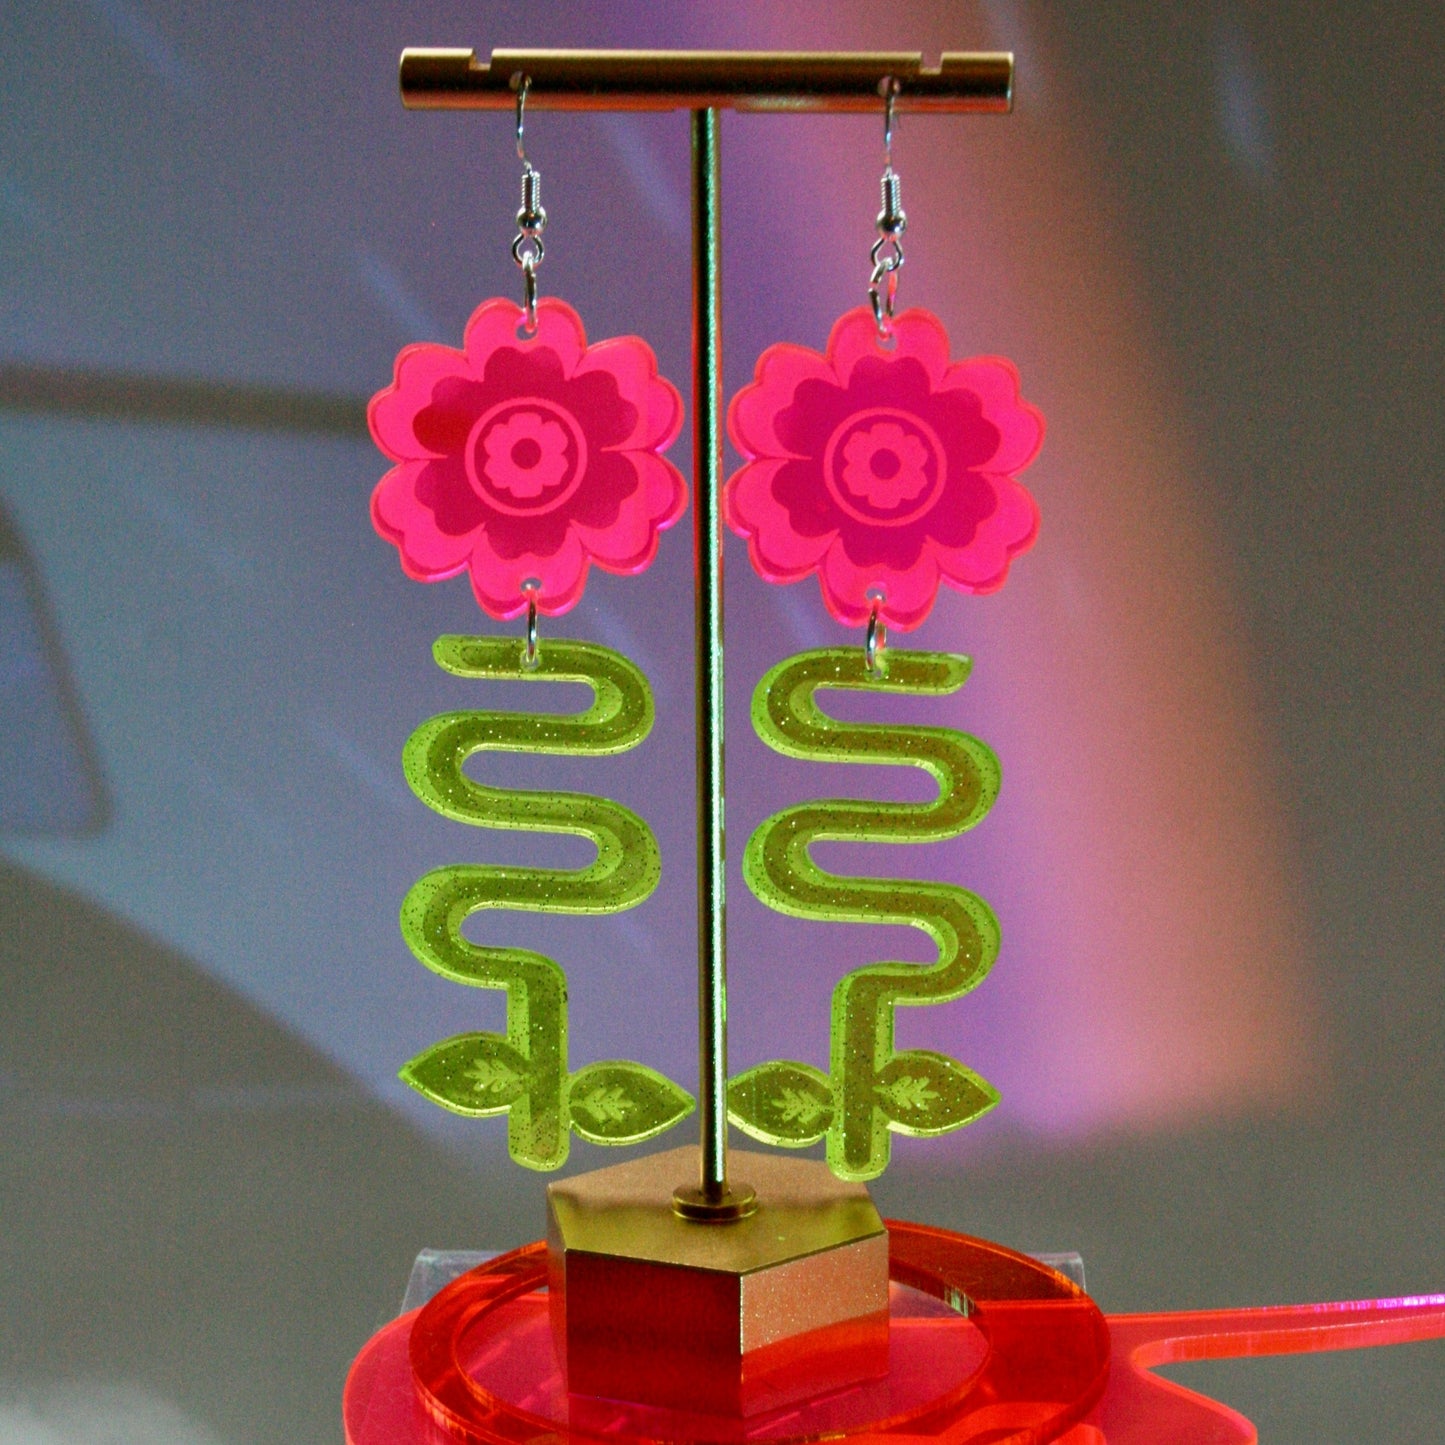 Flower Blossom Earrings- Neon Sparkly Green Pink Unique Art Deco